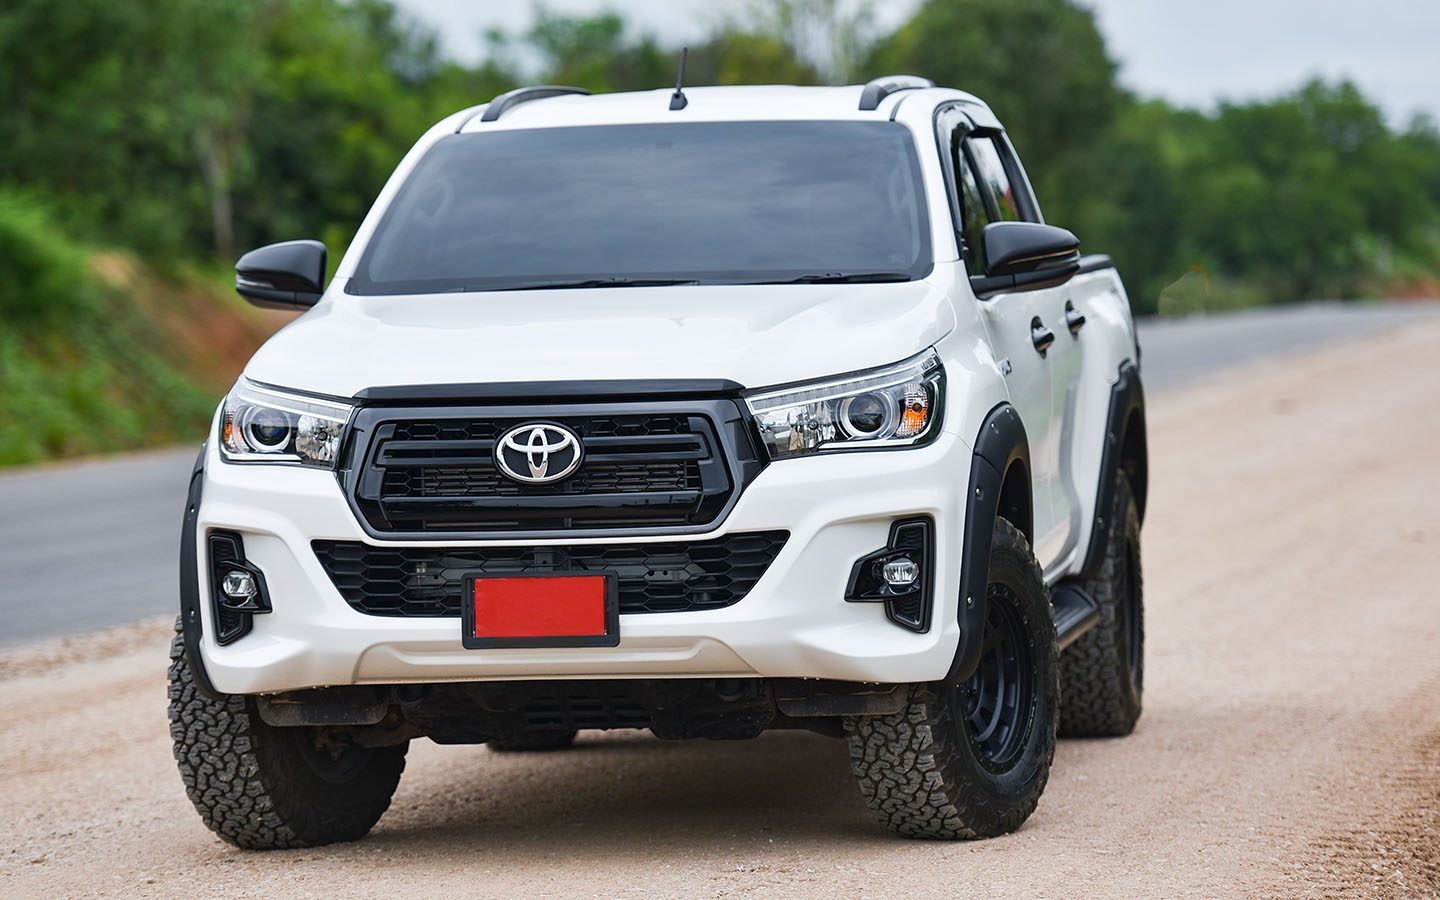 Toyota Hilux is also among the Popular Used Toyota Cars Under AED 150k